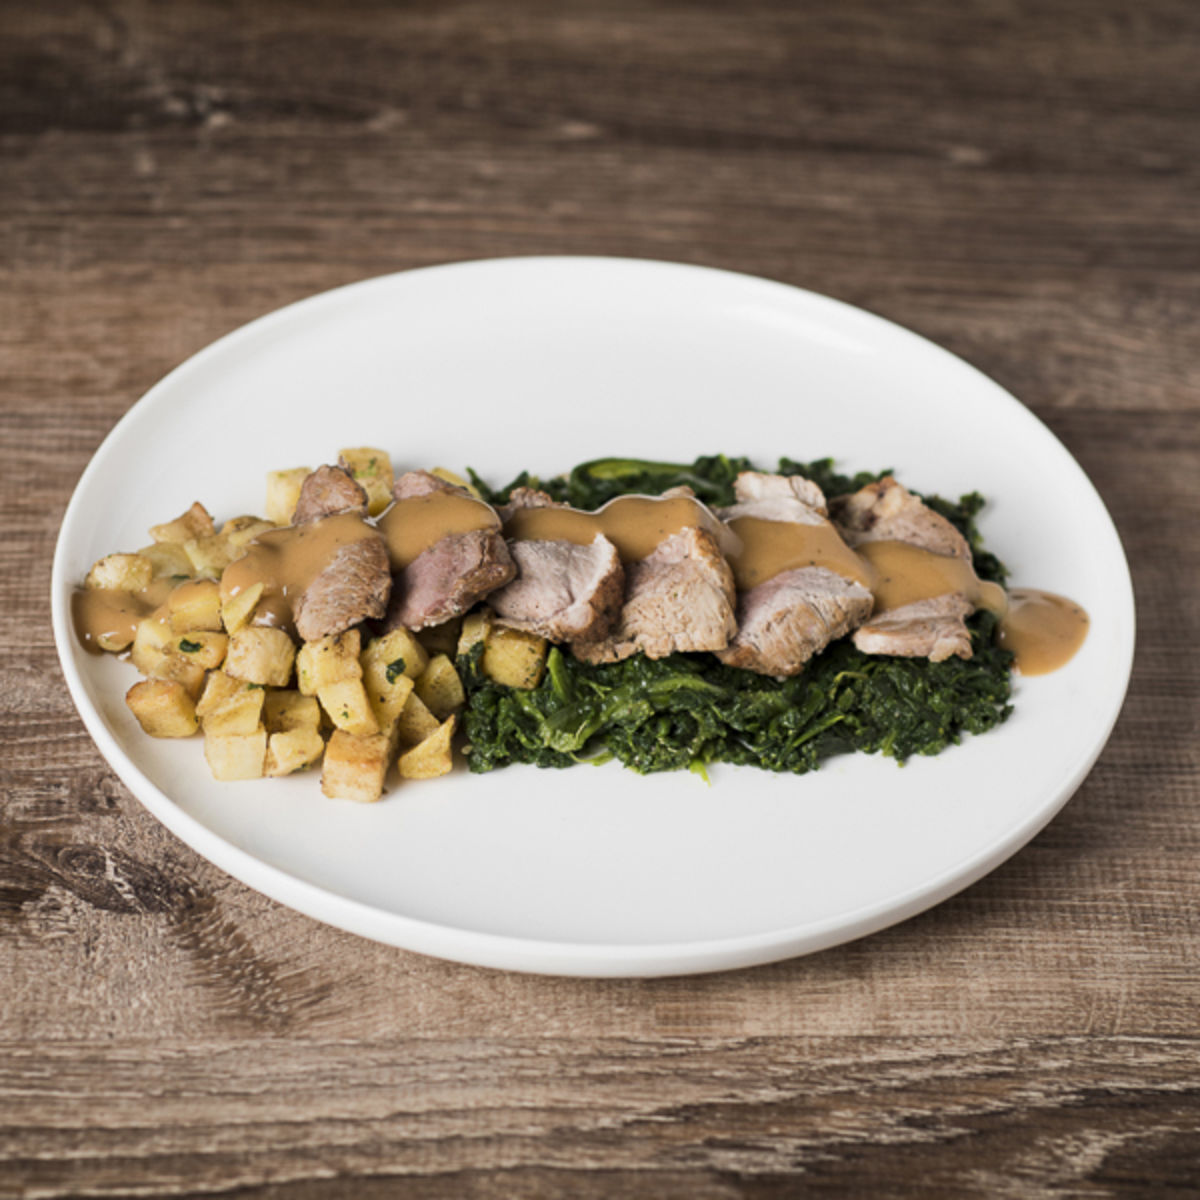 Pork tenderloin, spinach and fried potatoes with pepper sauce